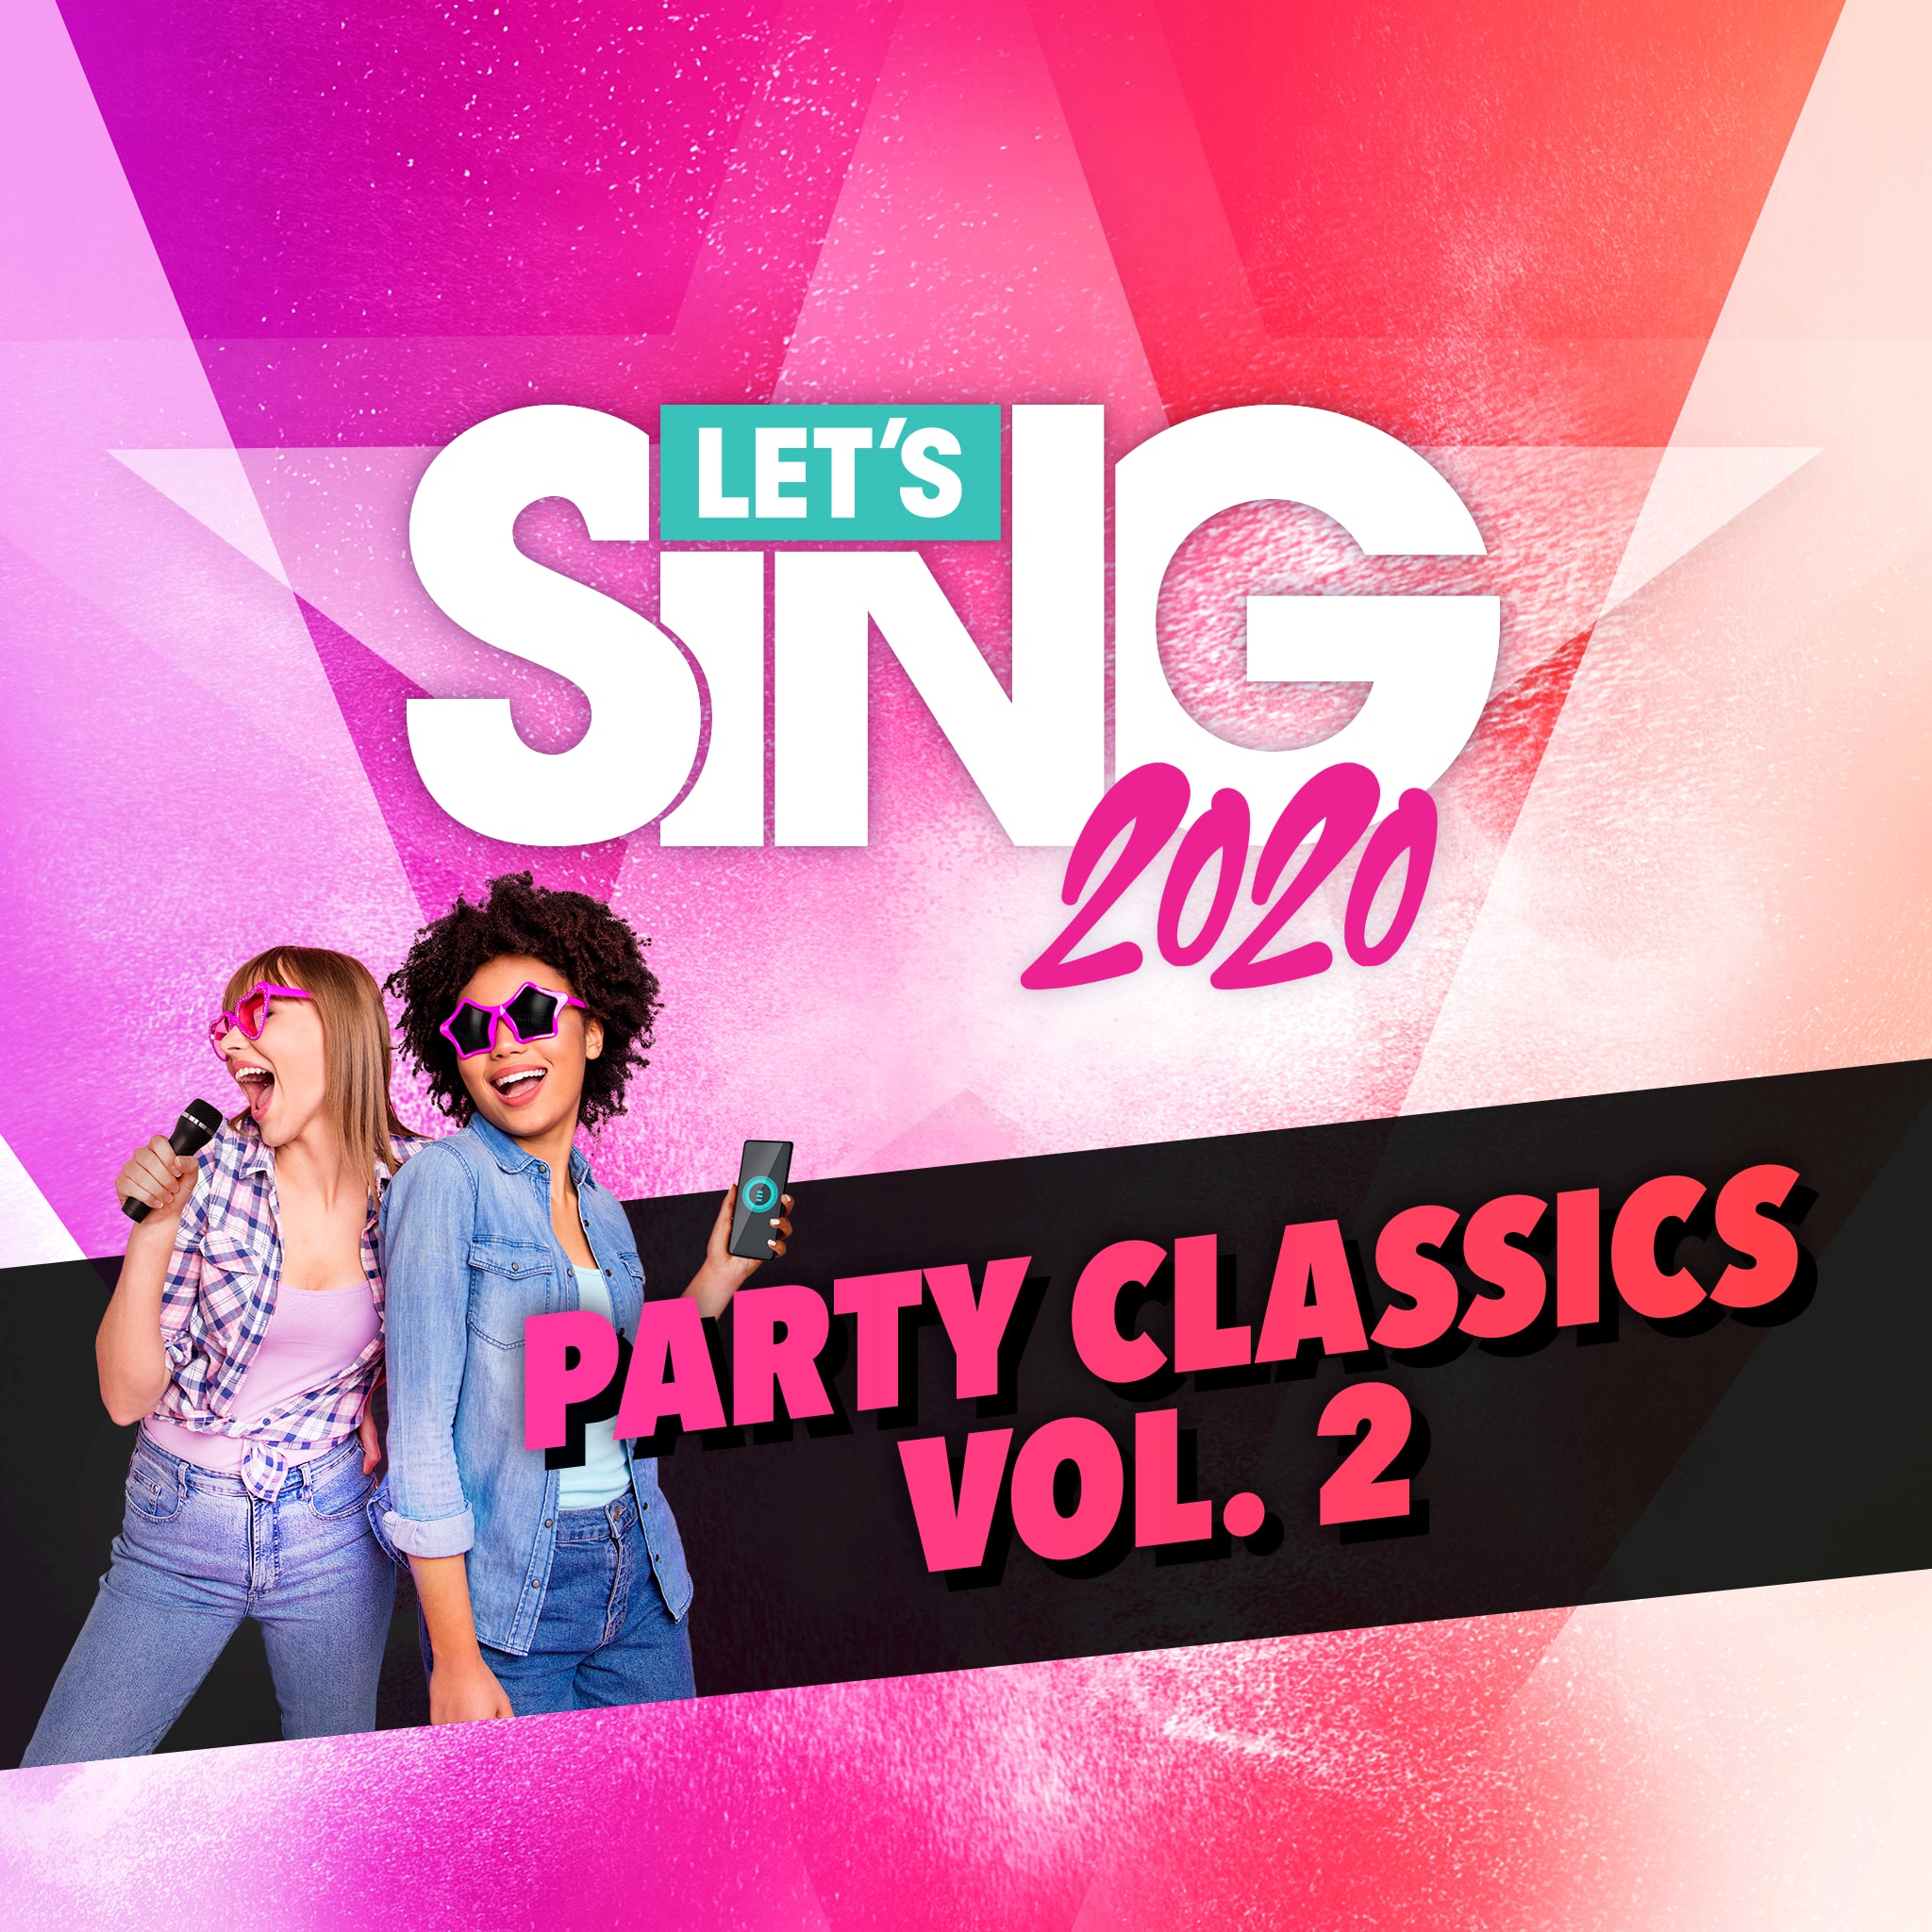 Let's Sing 2020 - Party Classics Vol. 2 Song Pack